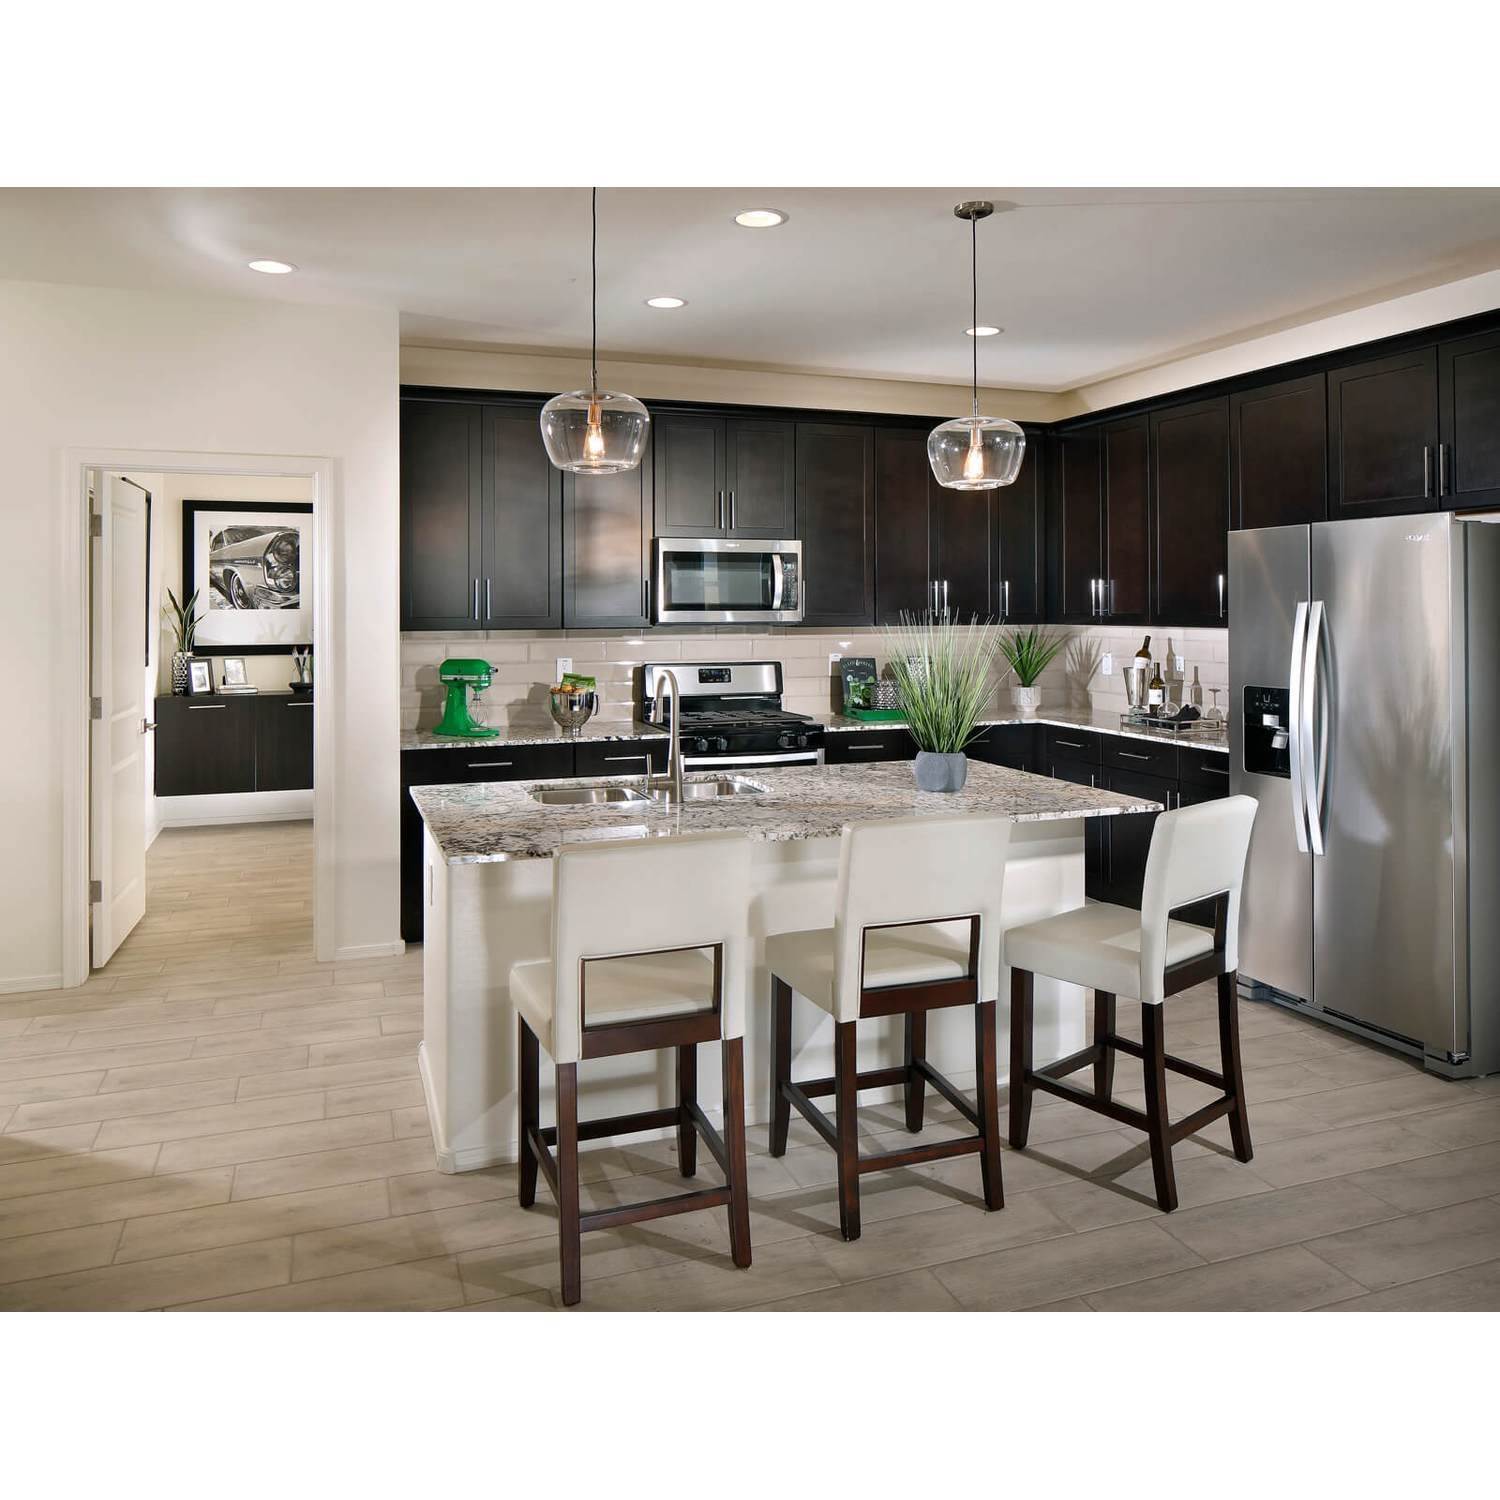 New Phase - The Preserve at Province building at 21132 N. Festival Lane, Maricopa, AZ 85138